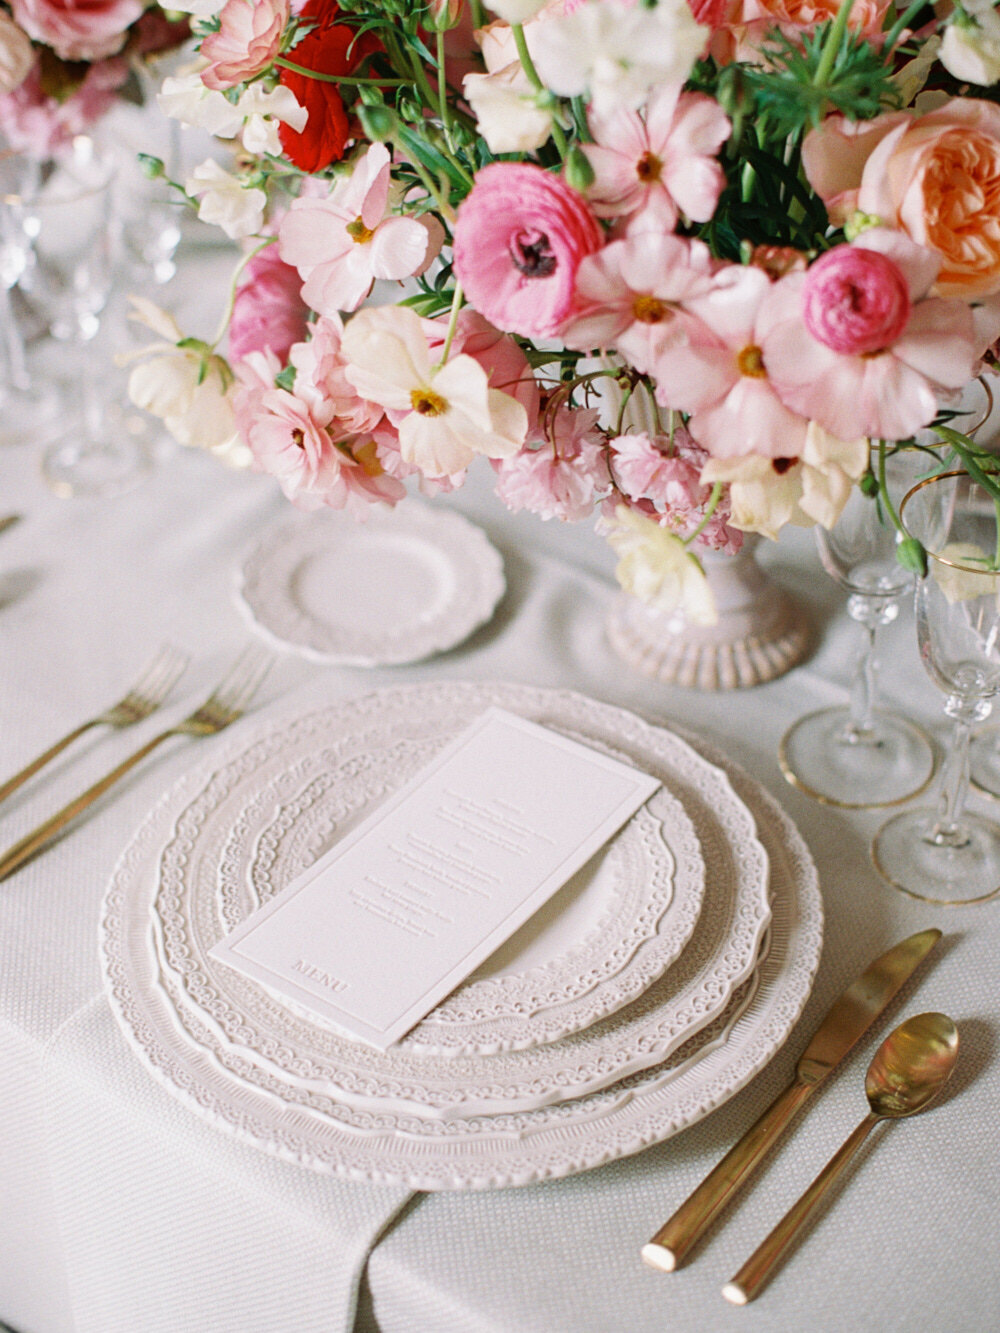 elegant and romantic wedding table setting with luxury tableware and red bold flowers